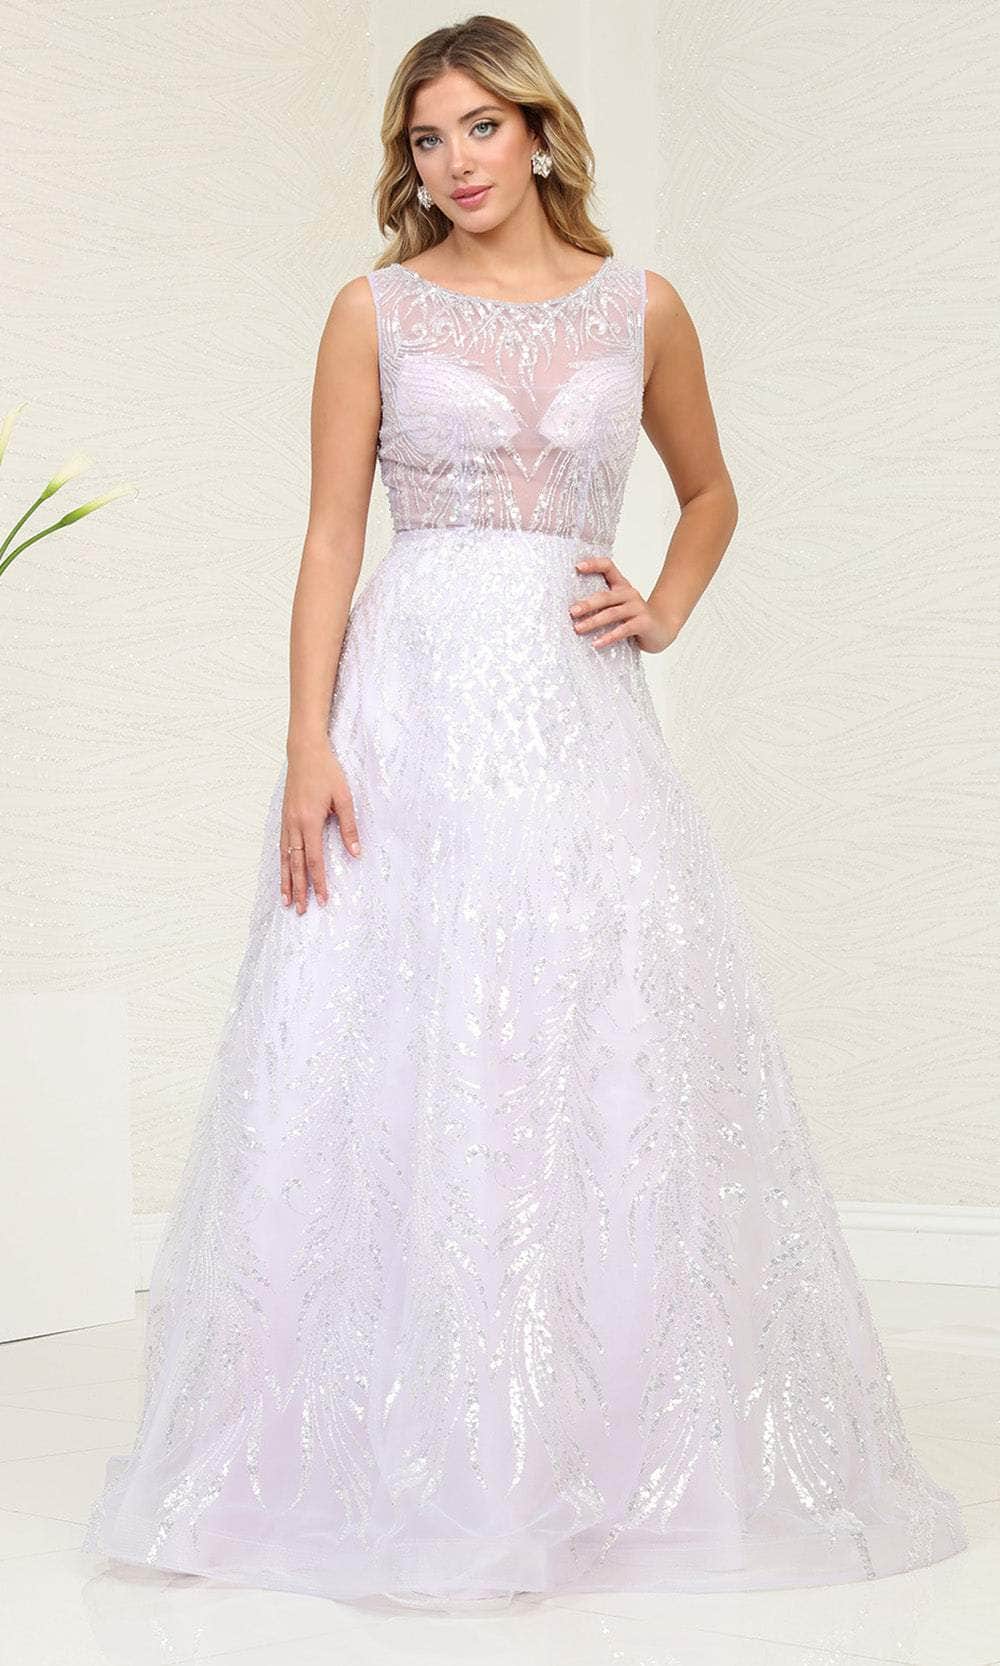 May Queen RQ8081 - Sequin A-Line Prom Gown Evening Dresses 4 / Lilac